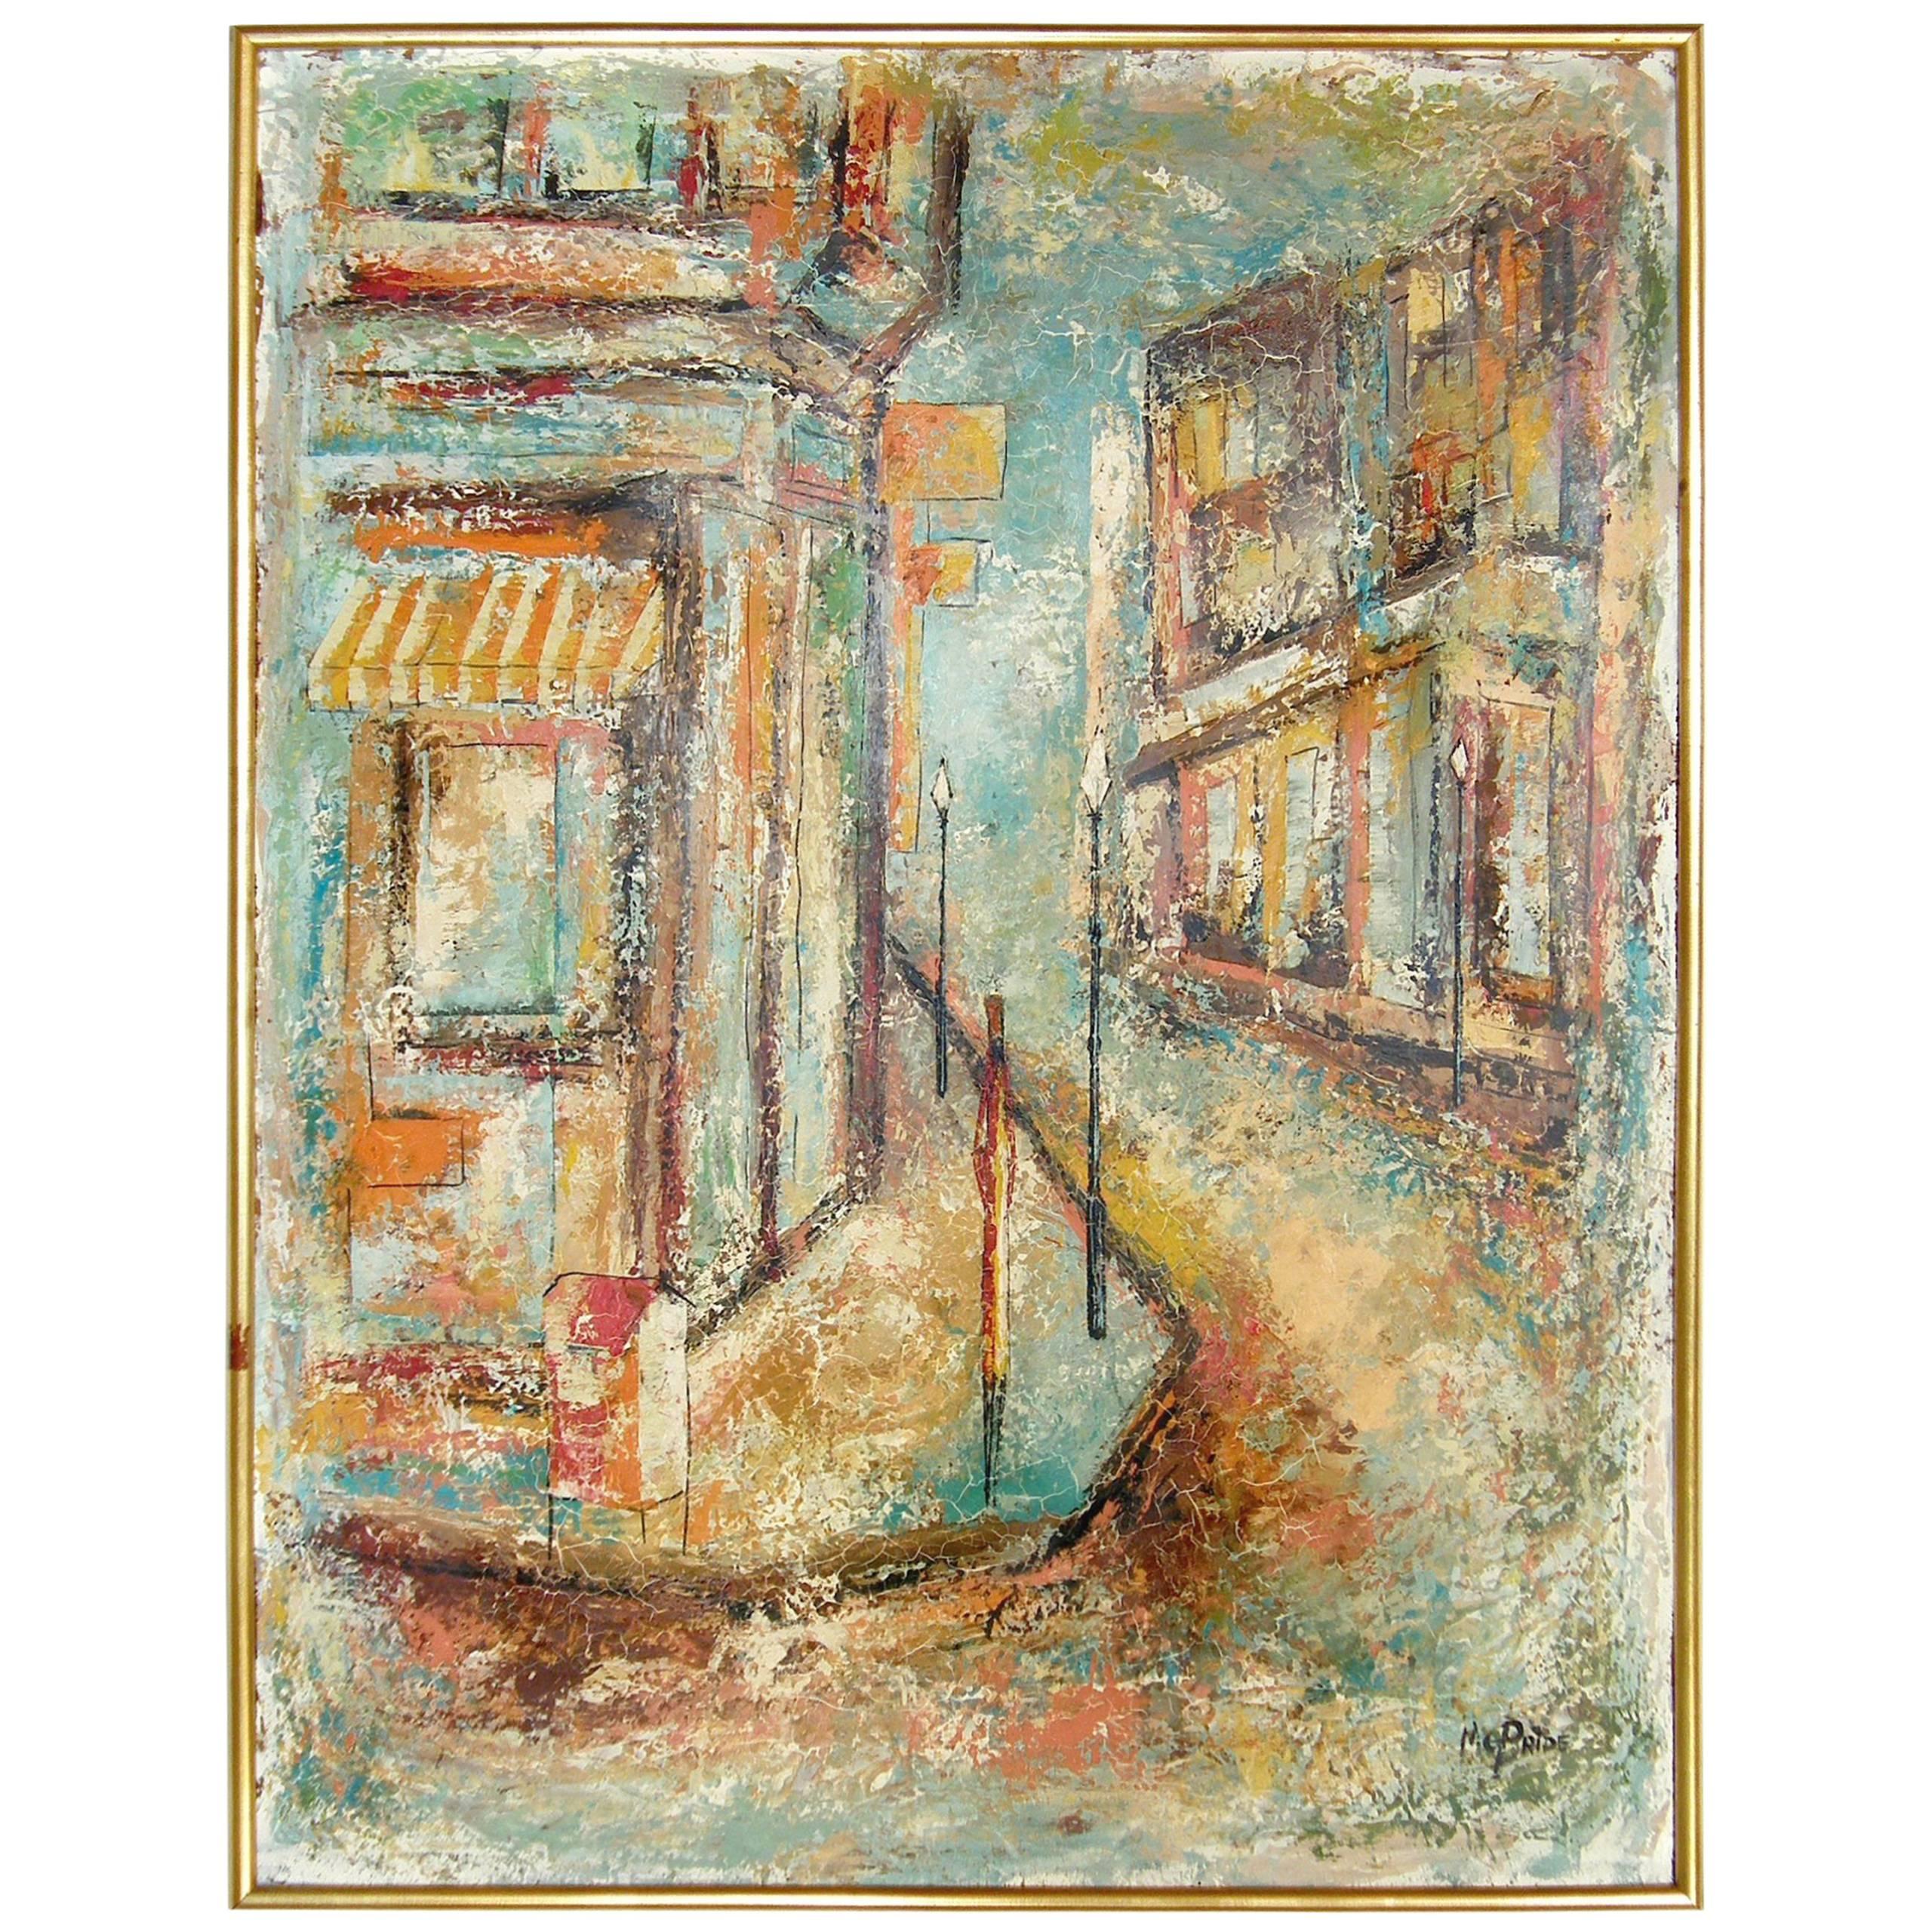 Abstract New Orleans French Quarter Painting Chicago Artist William McBride Jr